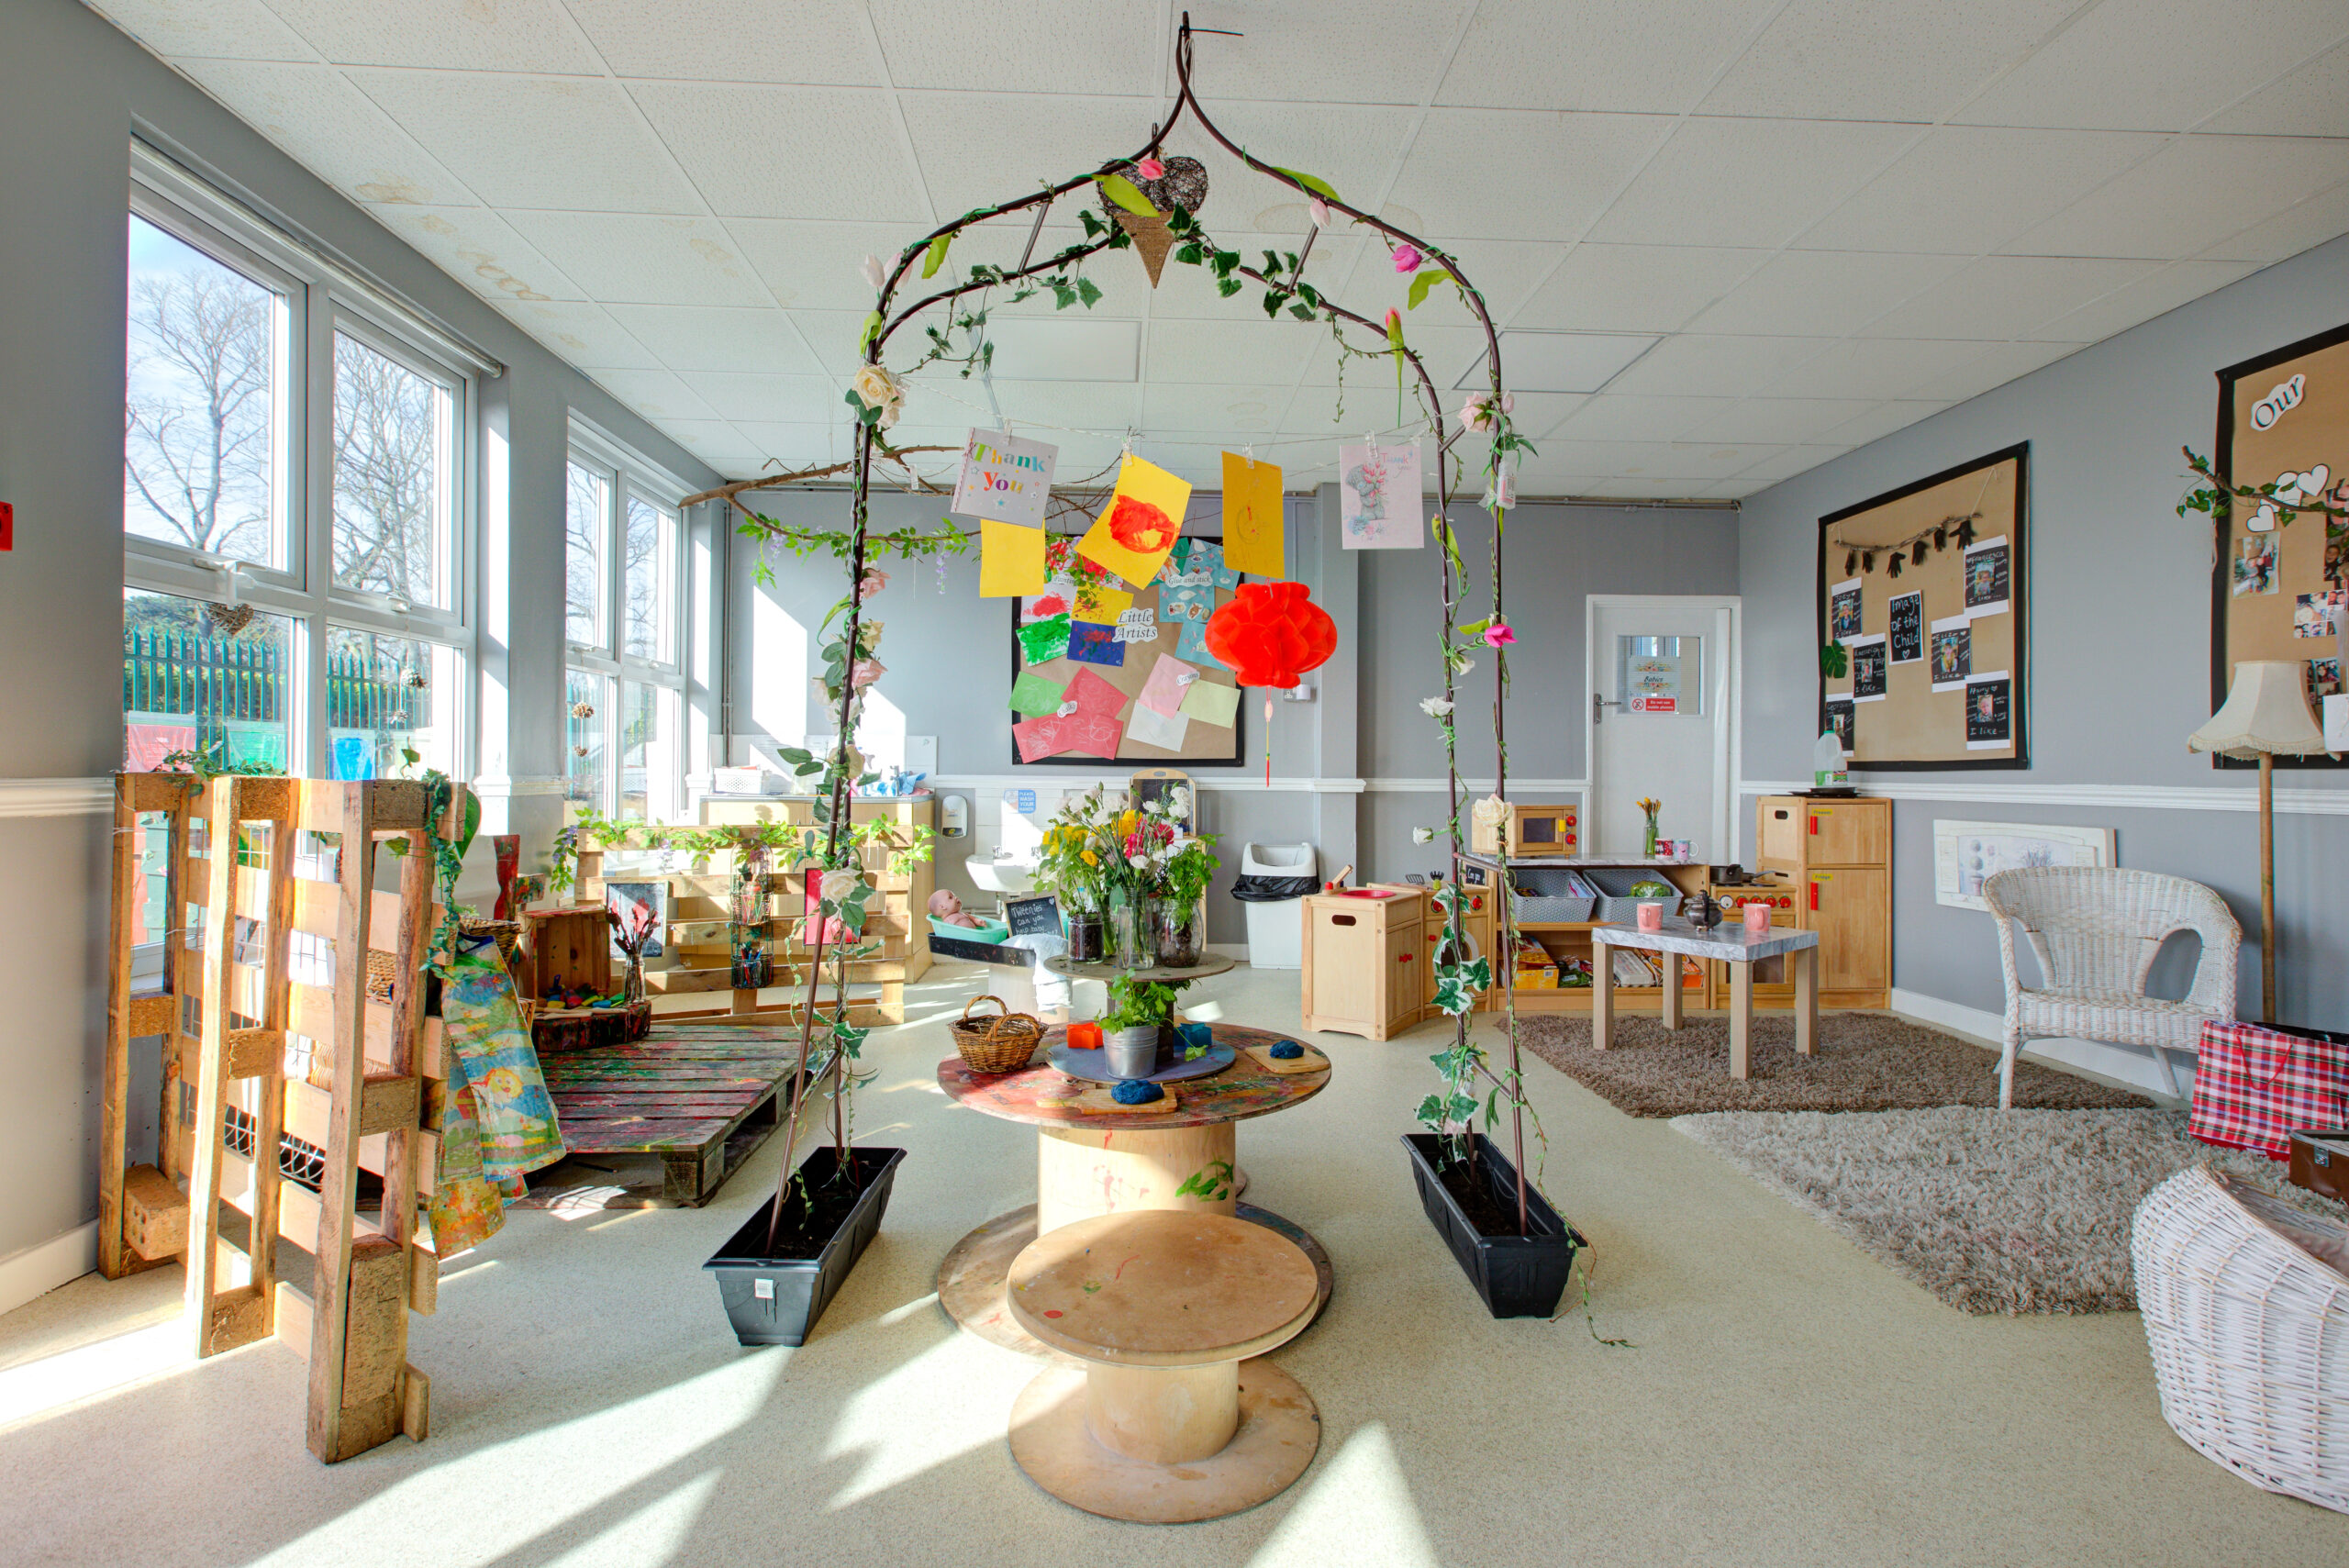 Take a look at our beautiful Stockton nursery – Cheeky Monkees